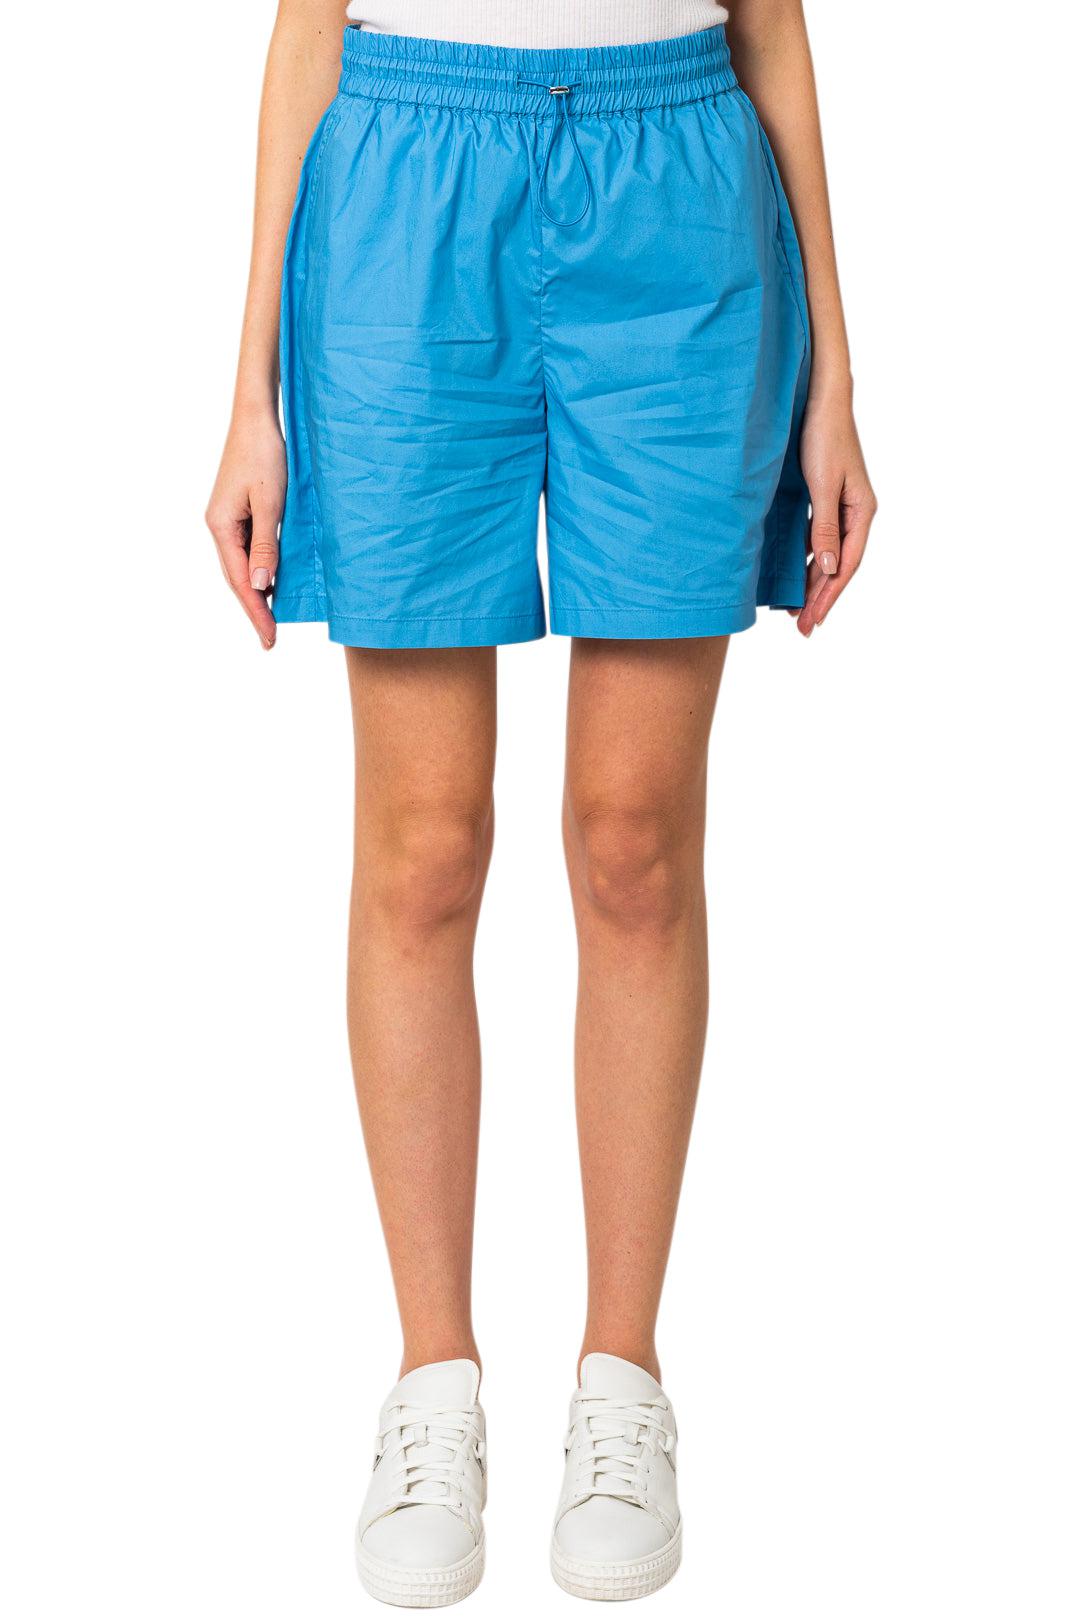 Herskind-Cotton relaxed shorts-dgallerystore